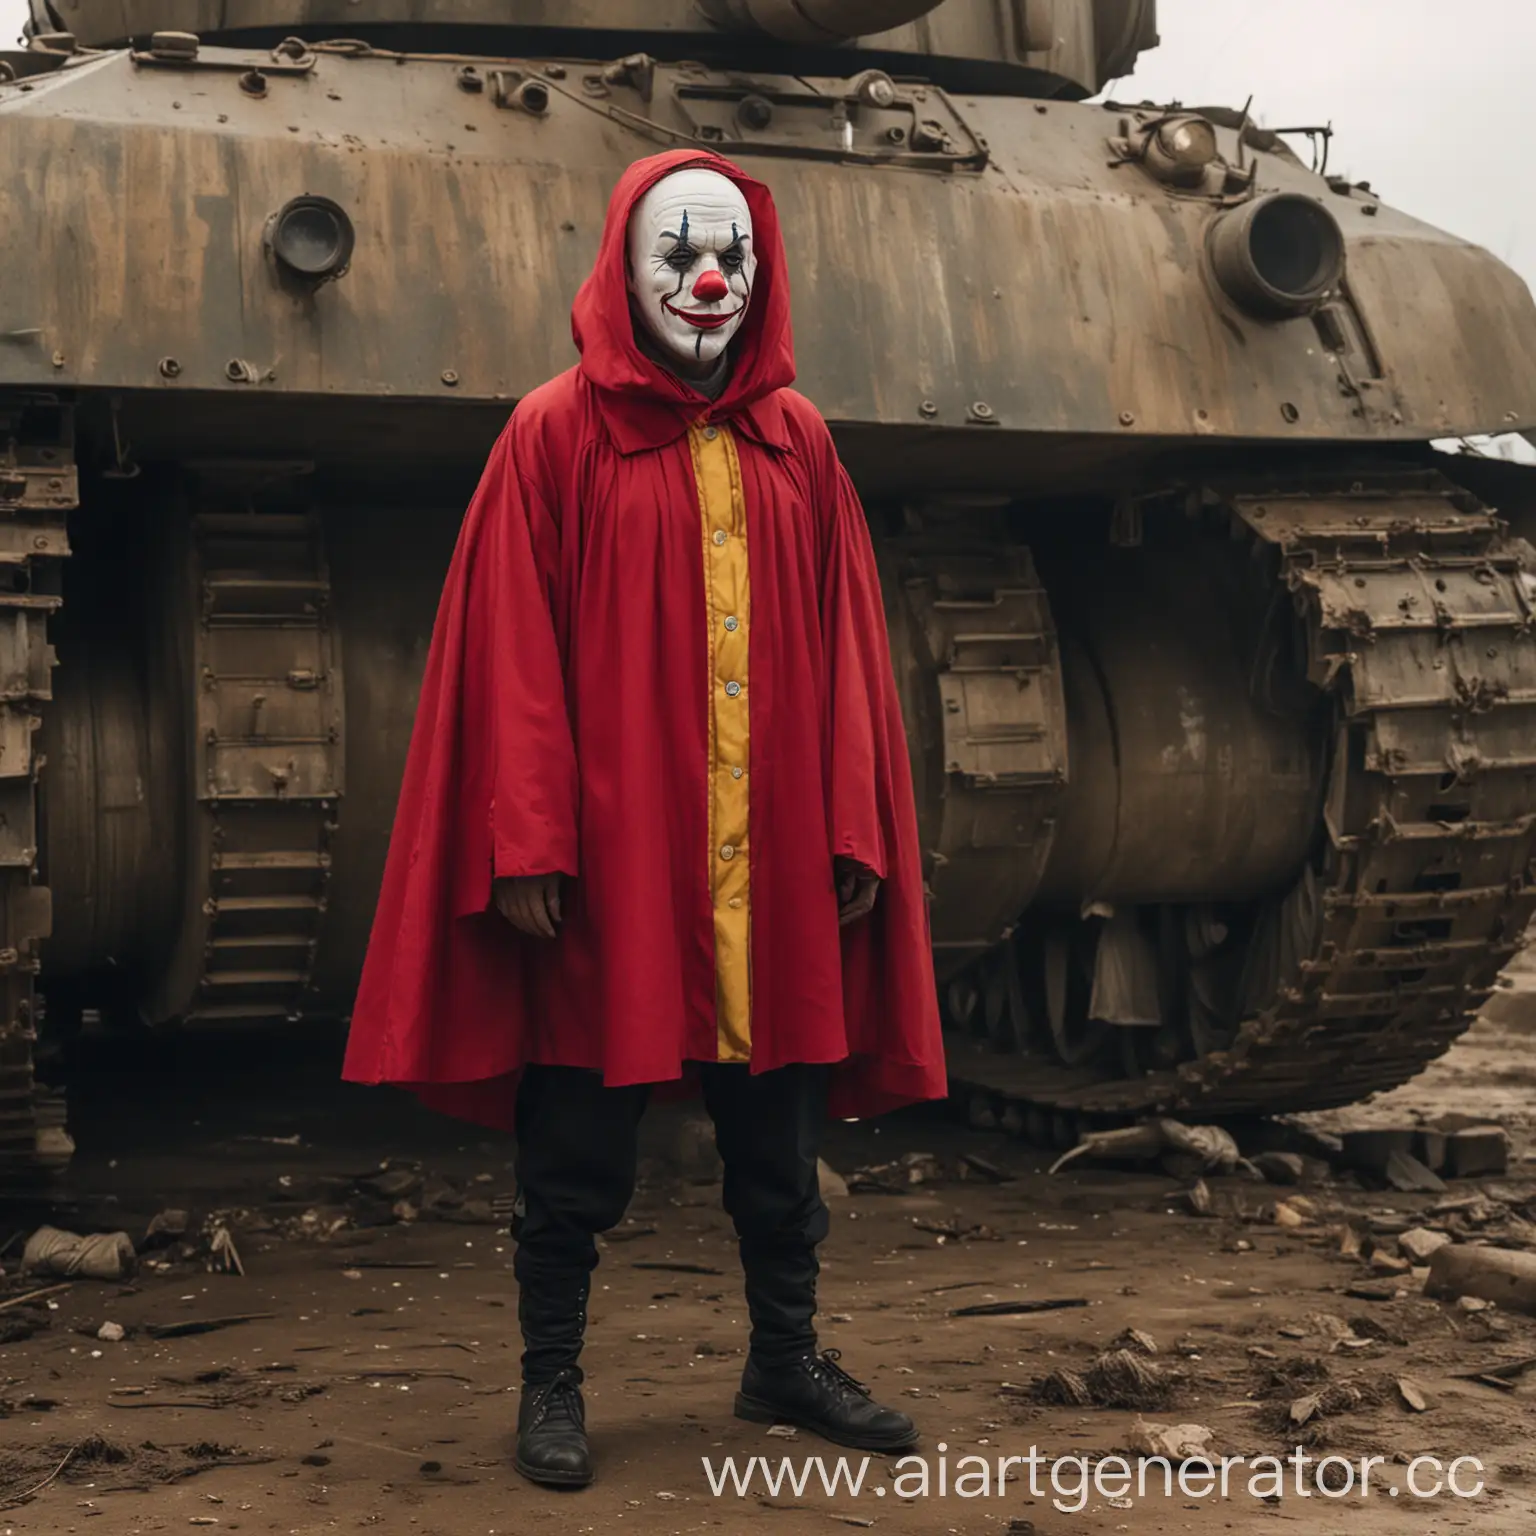 Mysterious-Figure-in-Red-Cloak-Stands-Beneath-Military-Tank